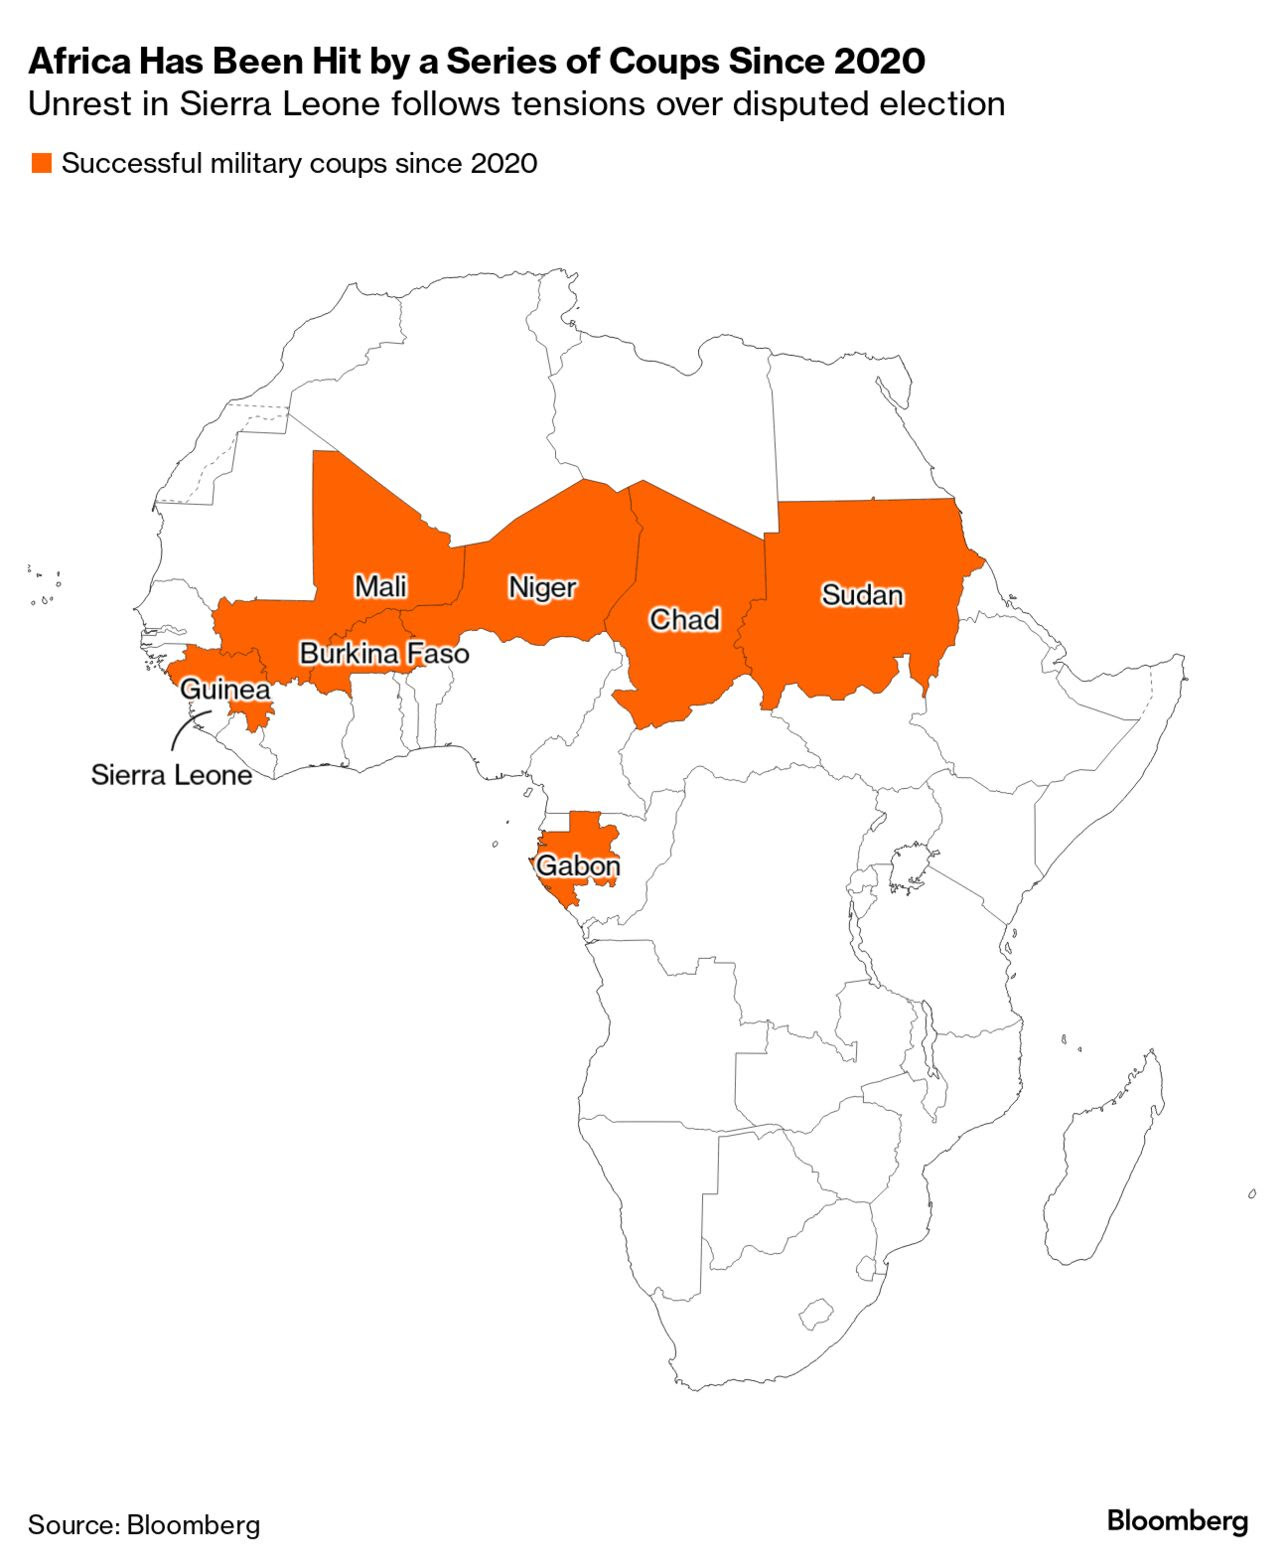 A map showing that almost all the Sahel countries have been affected by coups since 2020